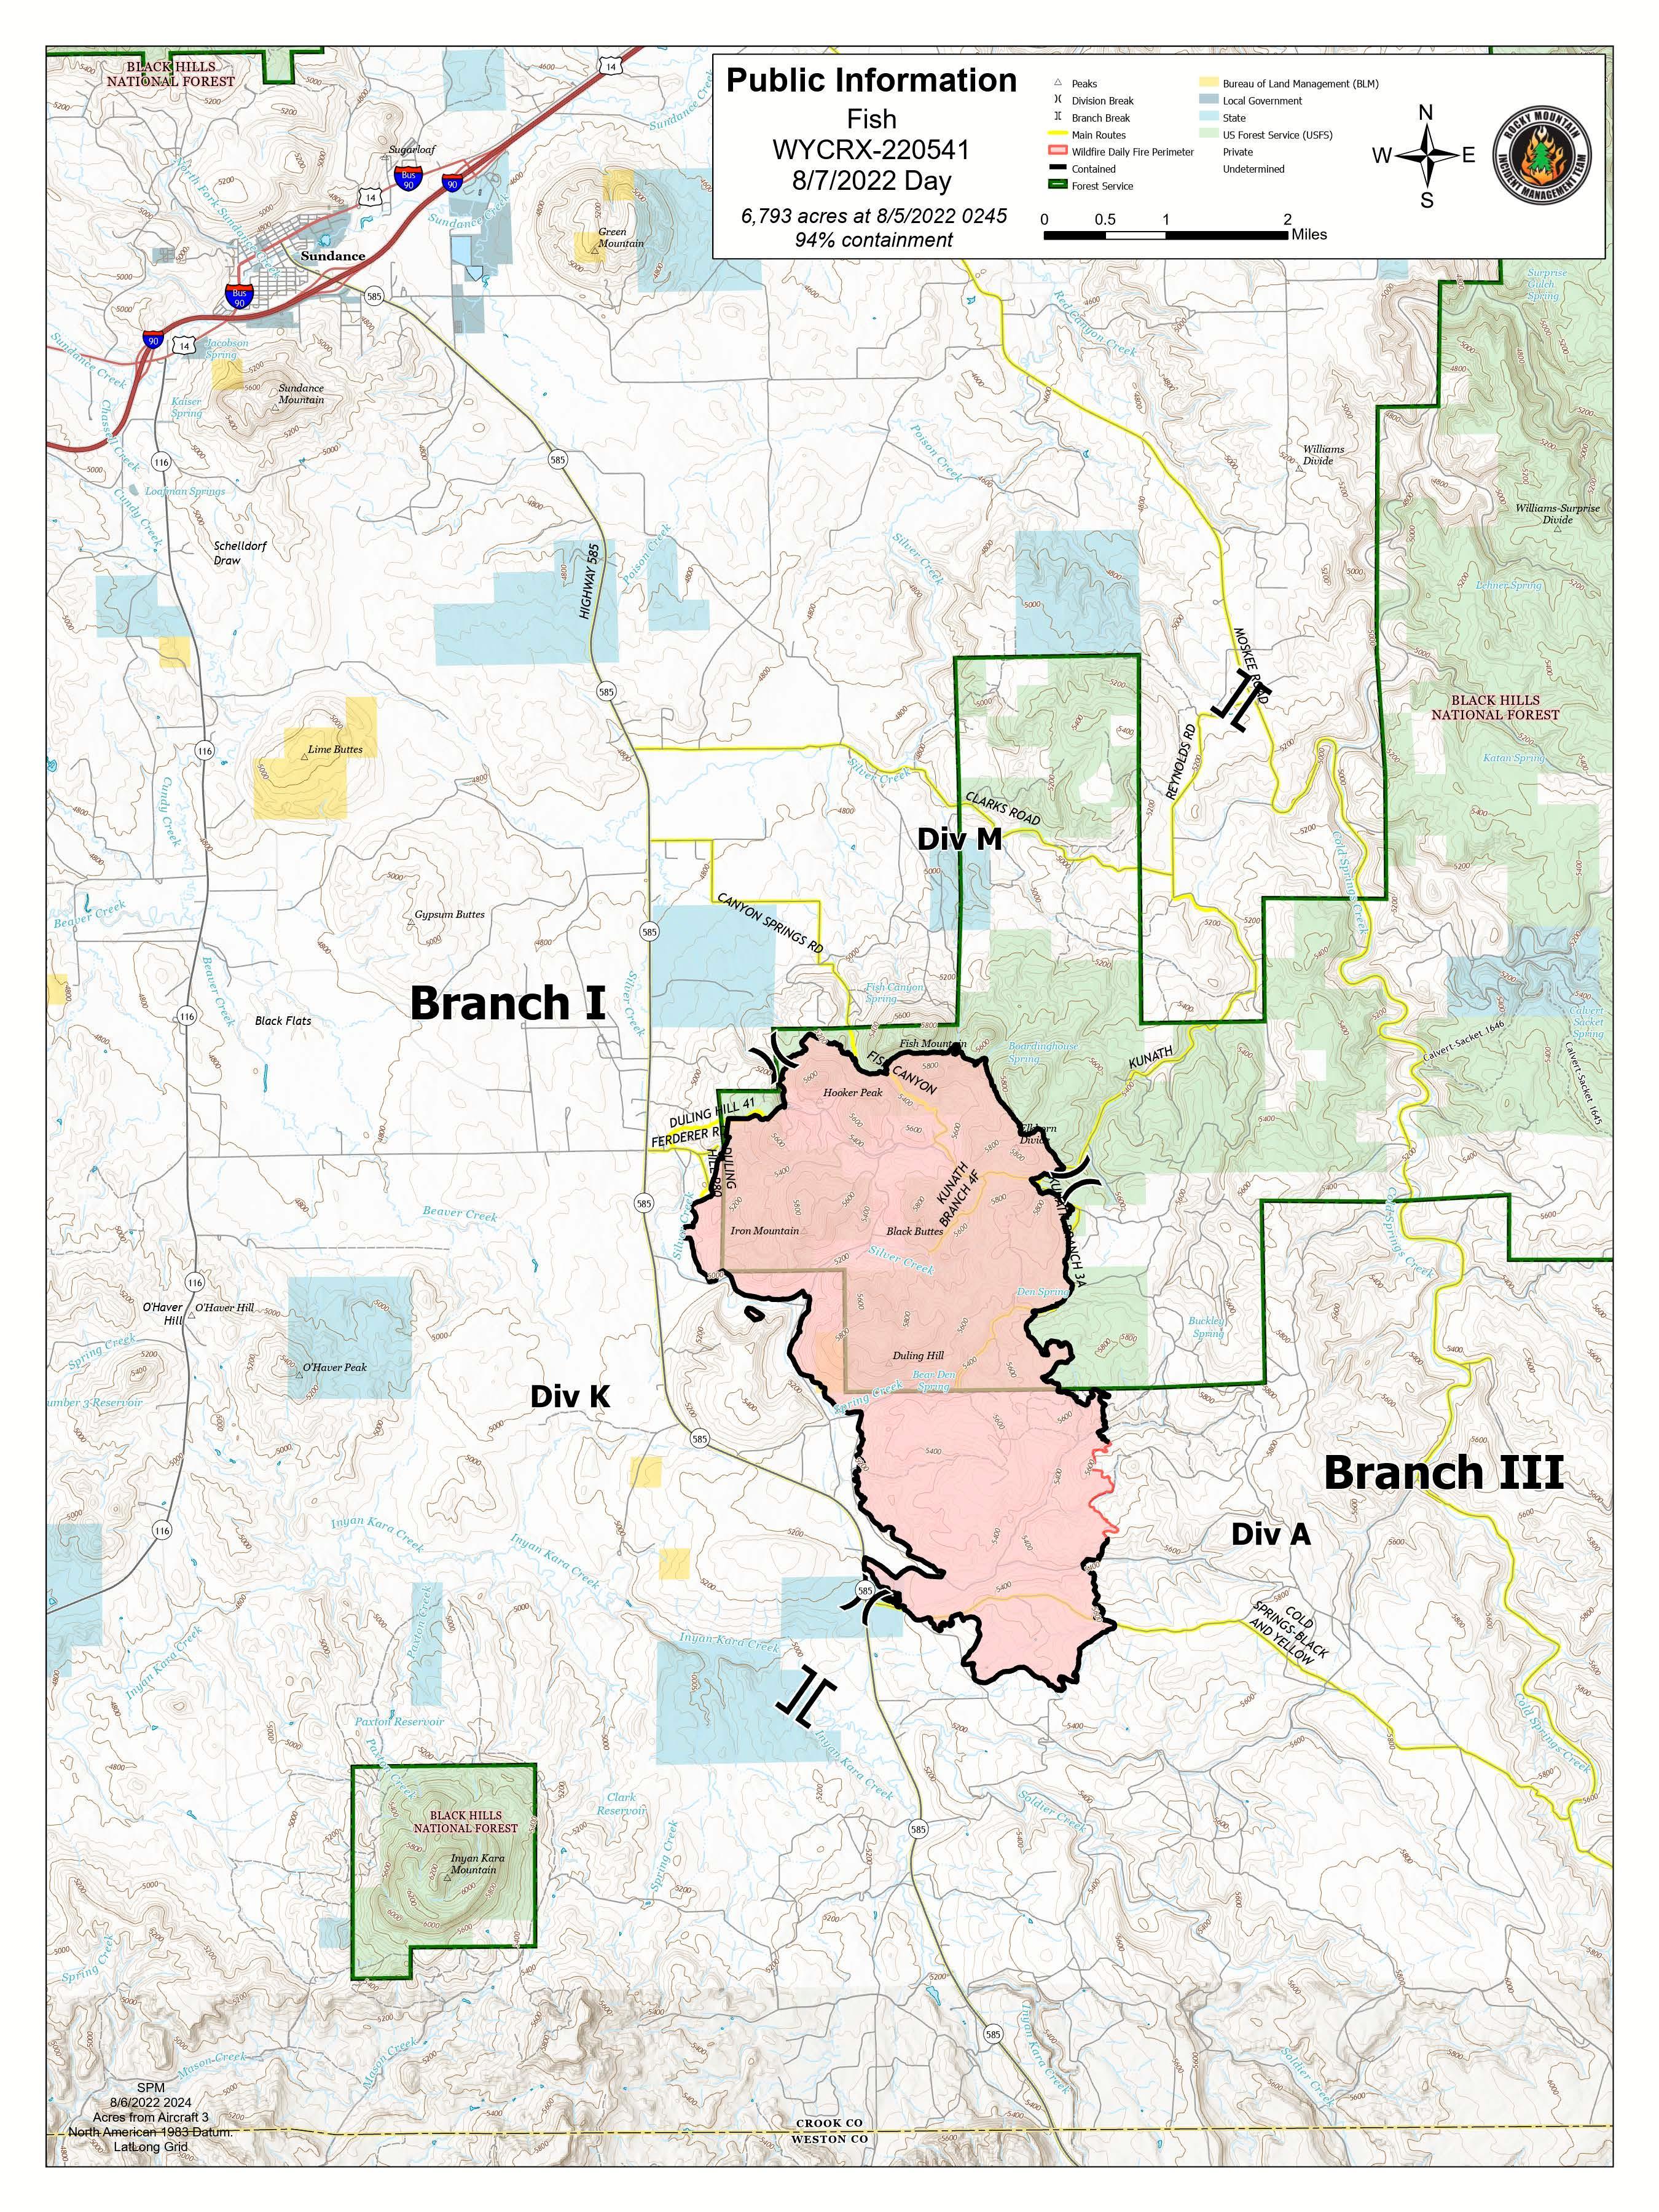 Fish Fire map, Sunday, August 7